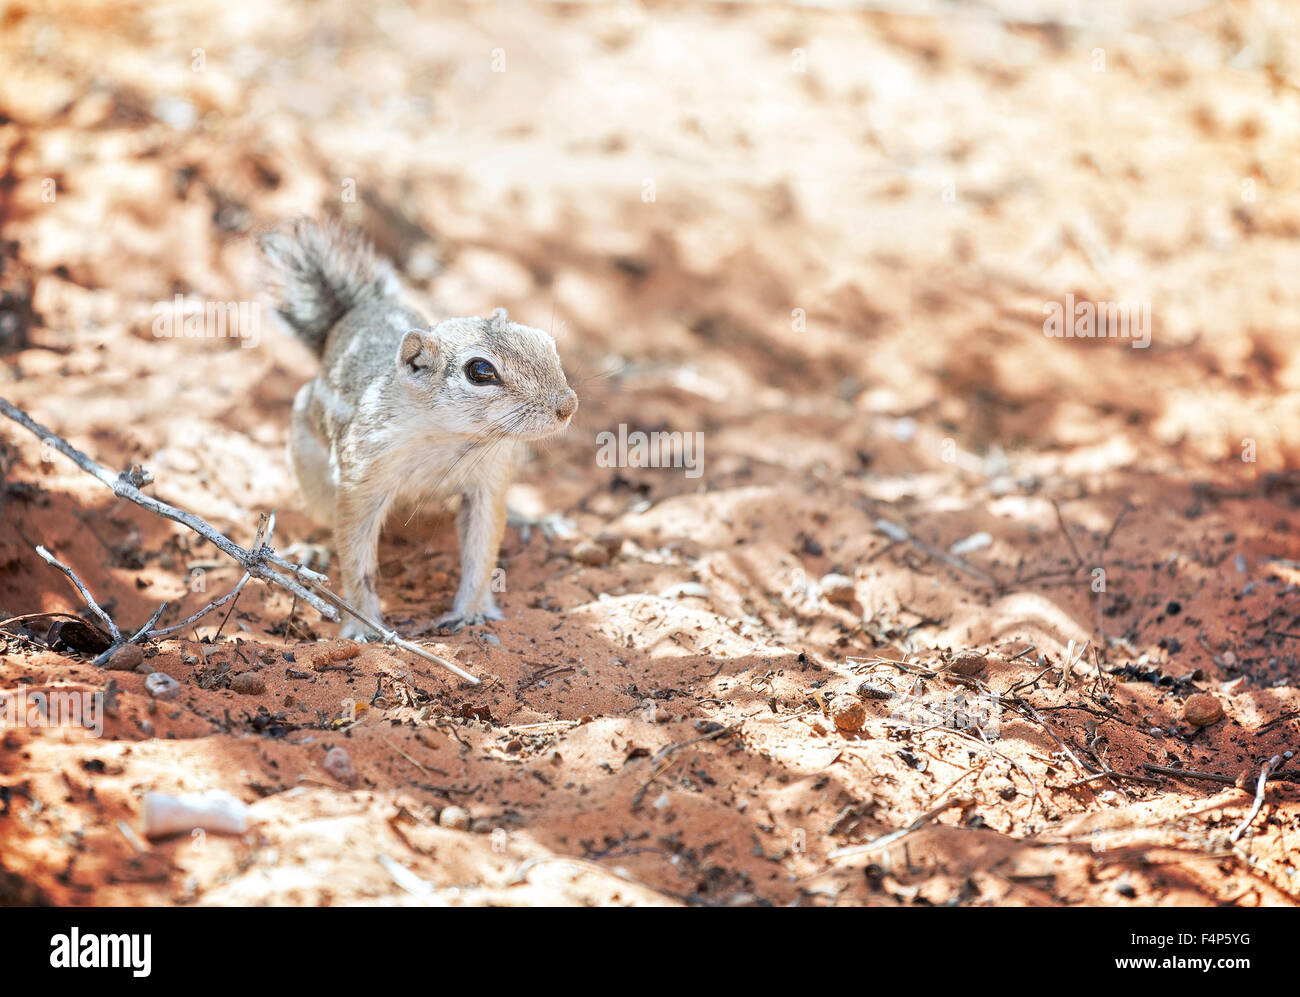 Squirrel in a natural habitat, Valley of Fire State Park, Nevada, USA. Stock Photo